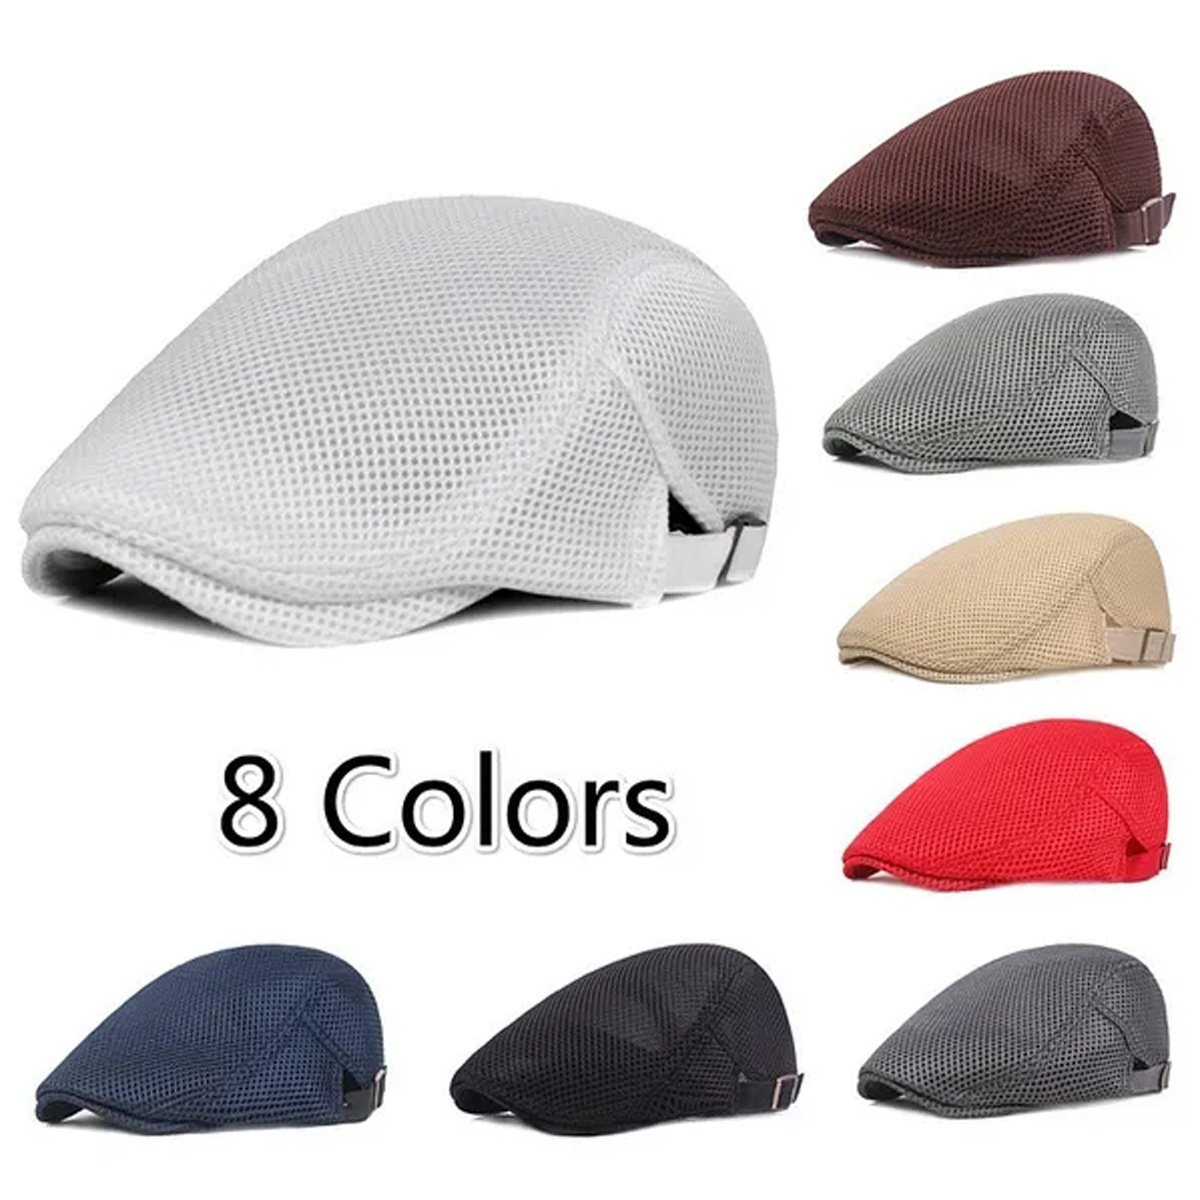 1pc 8 colors men cabbie flat cap breathable mesh summer hat adjustable newsboy beret ivy cap ideal choice for gifts